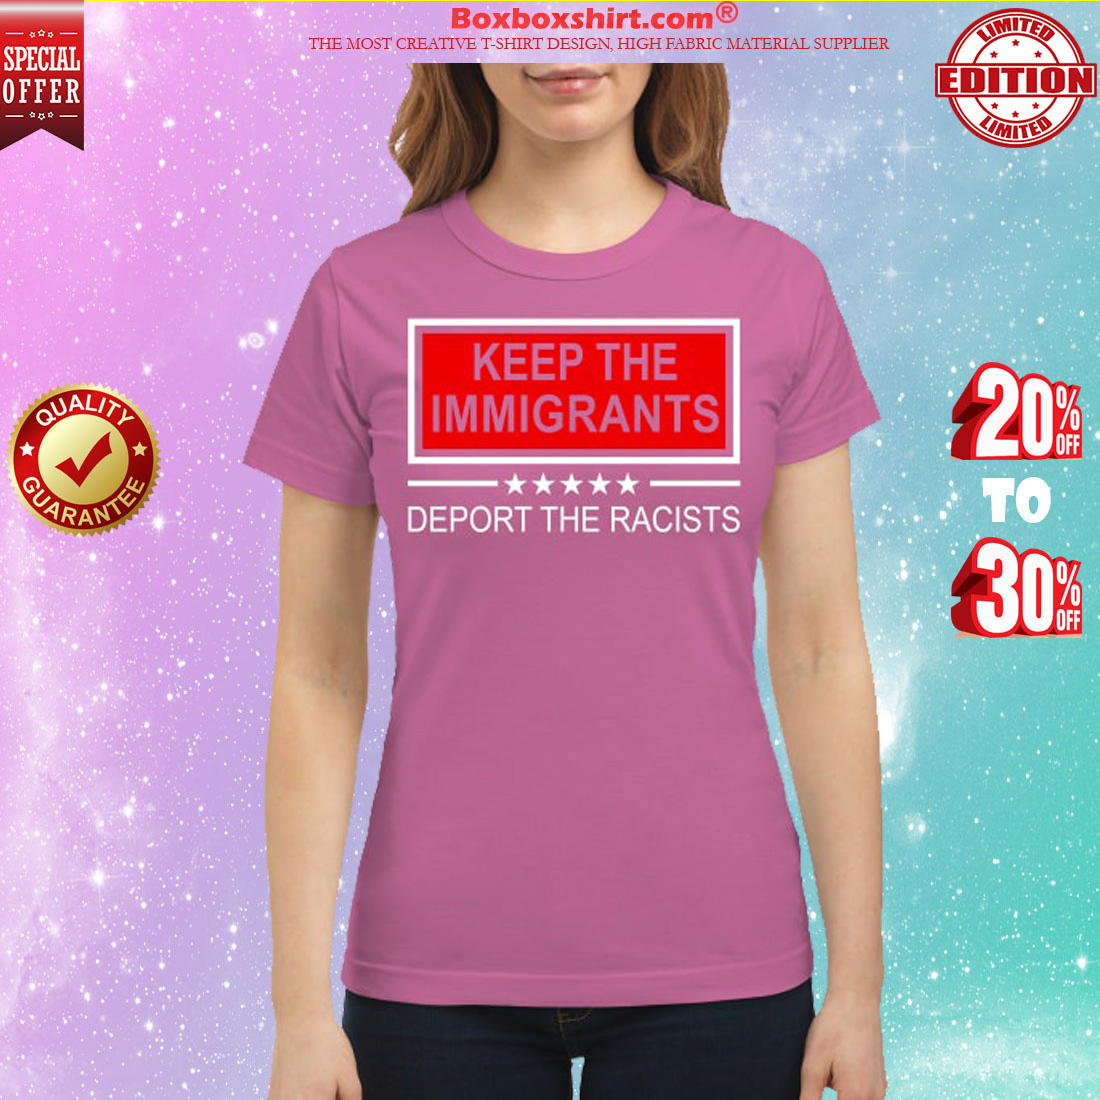 Keep the Immigrant deport the racists classic shirt